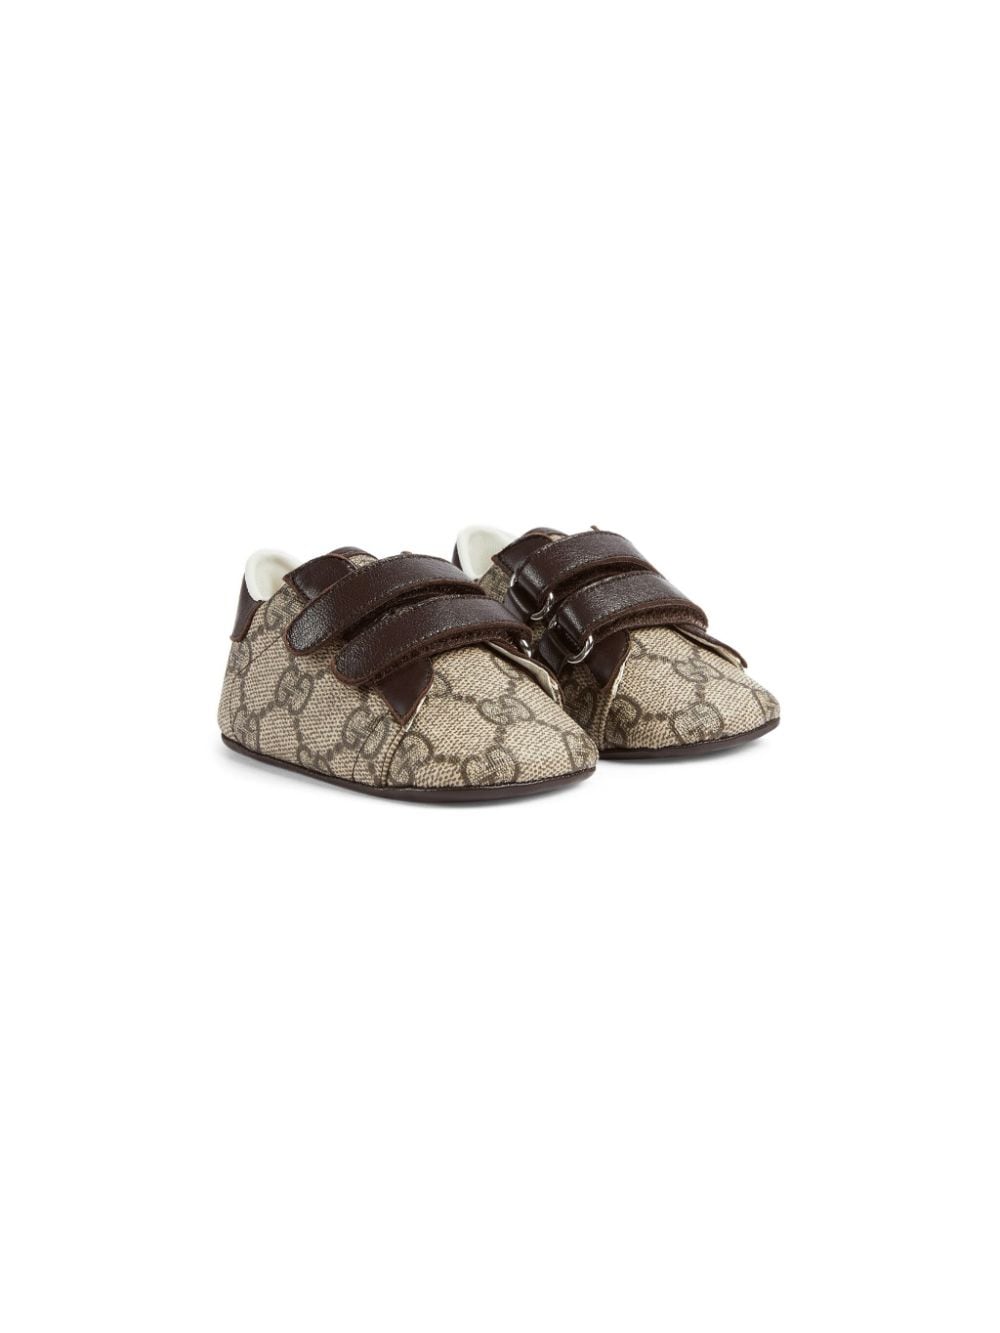 Gucci Babies' Ace Gg 提花学步鞋 In Brown